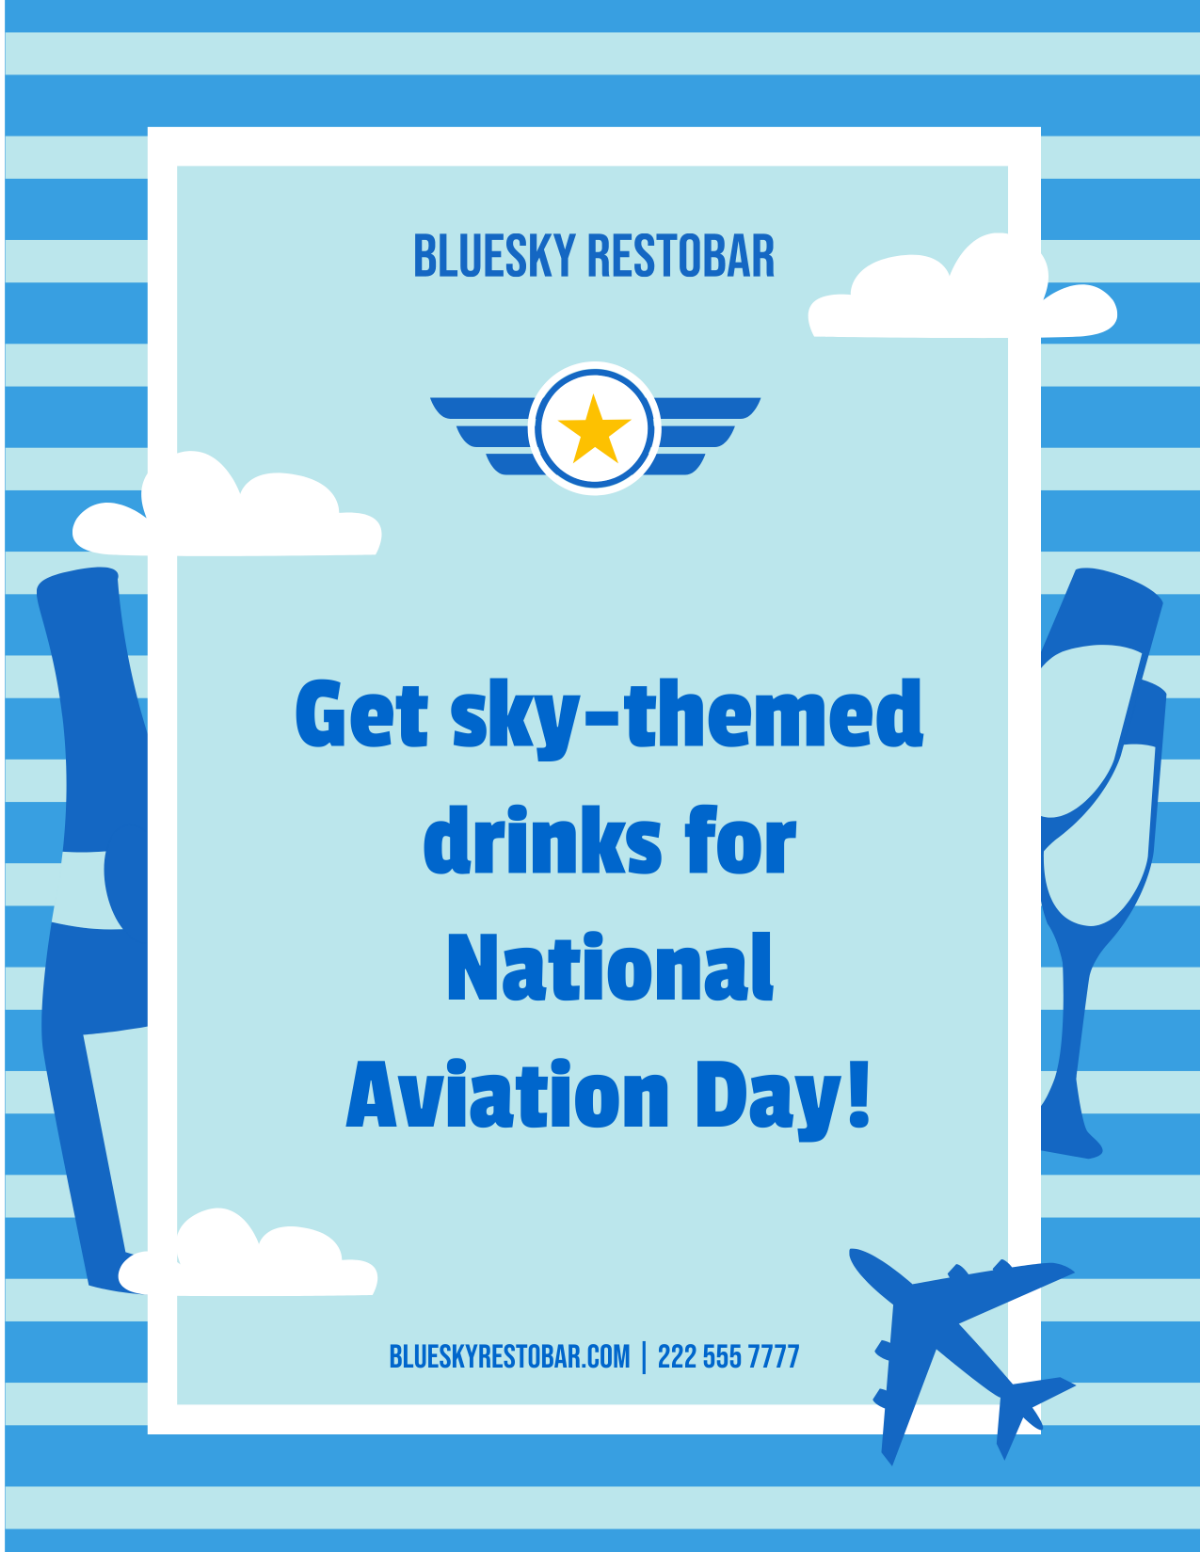 National Aviation Day Sales Promotion